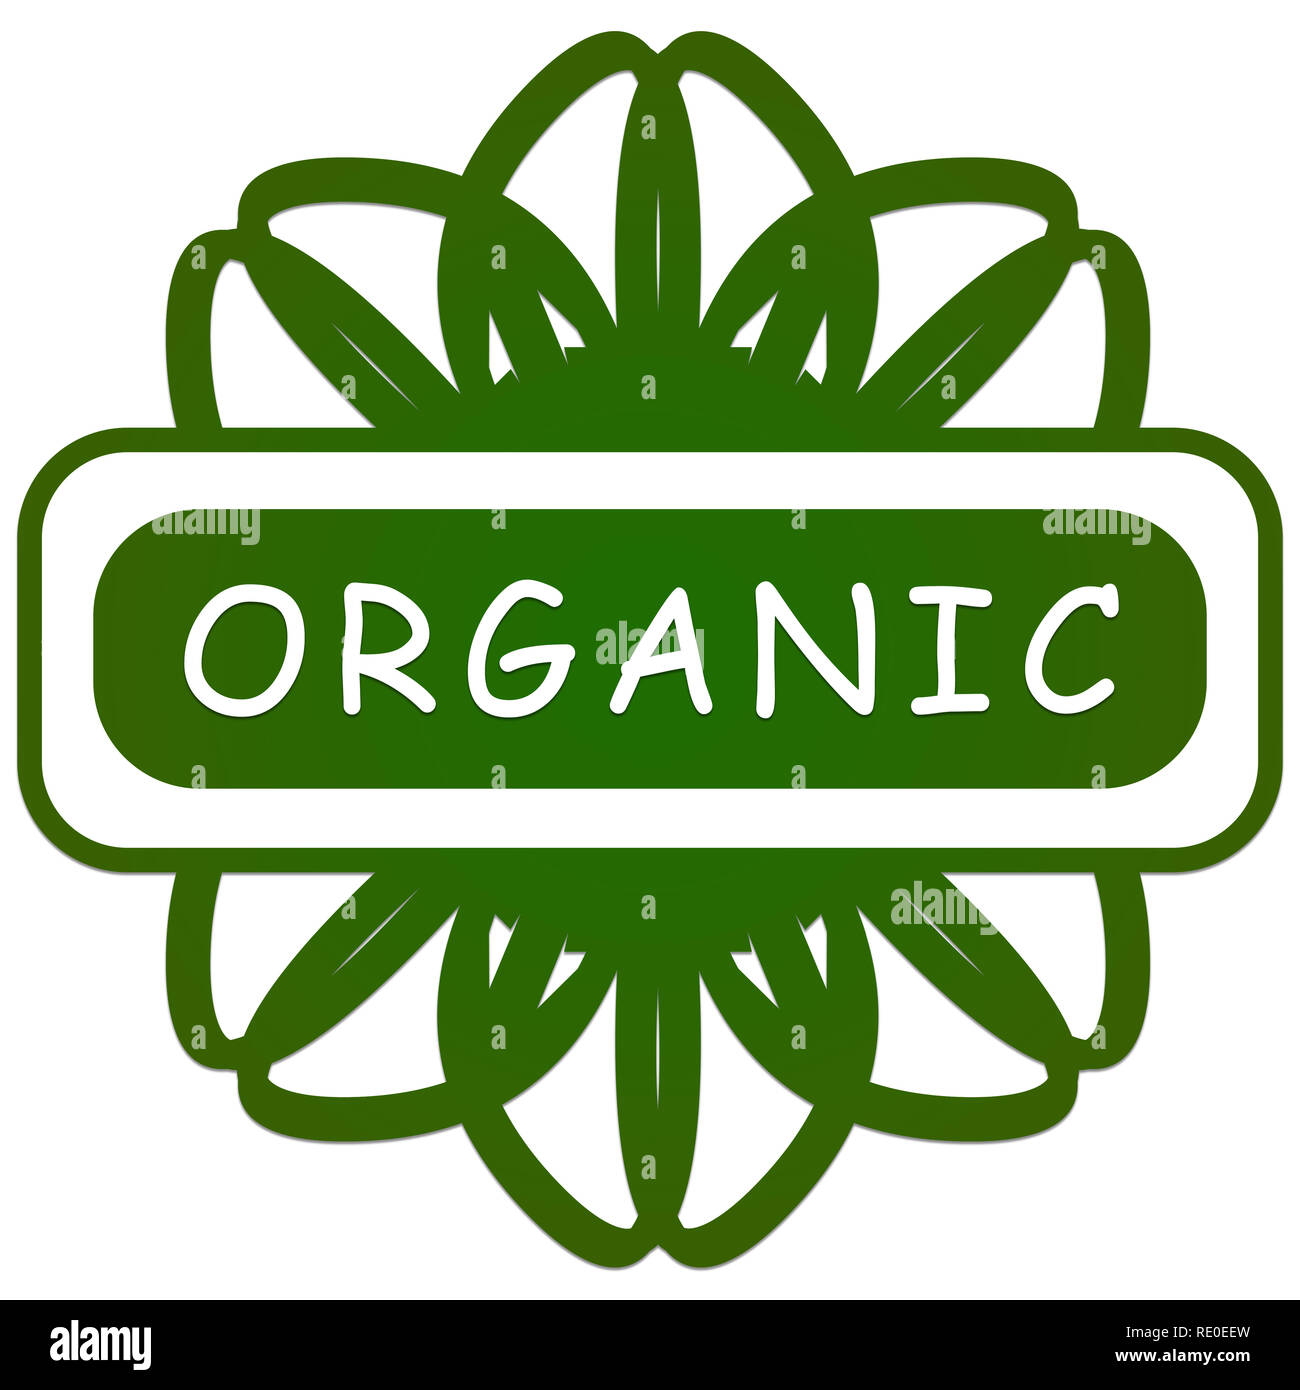 Organic or natural product logo, label on a white background Stock Photo